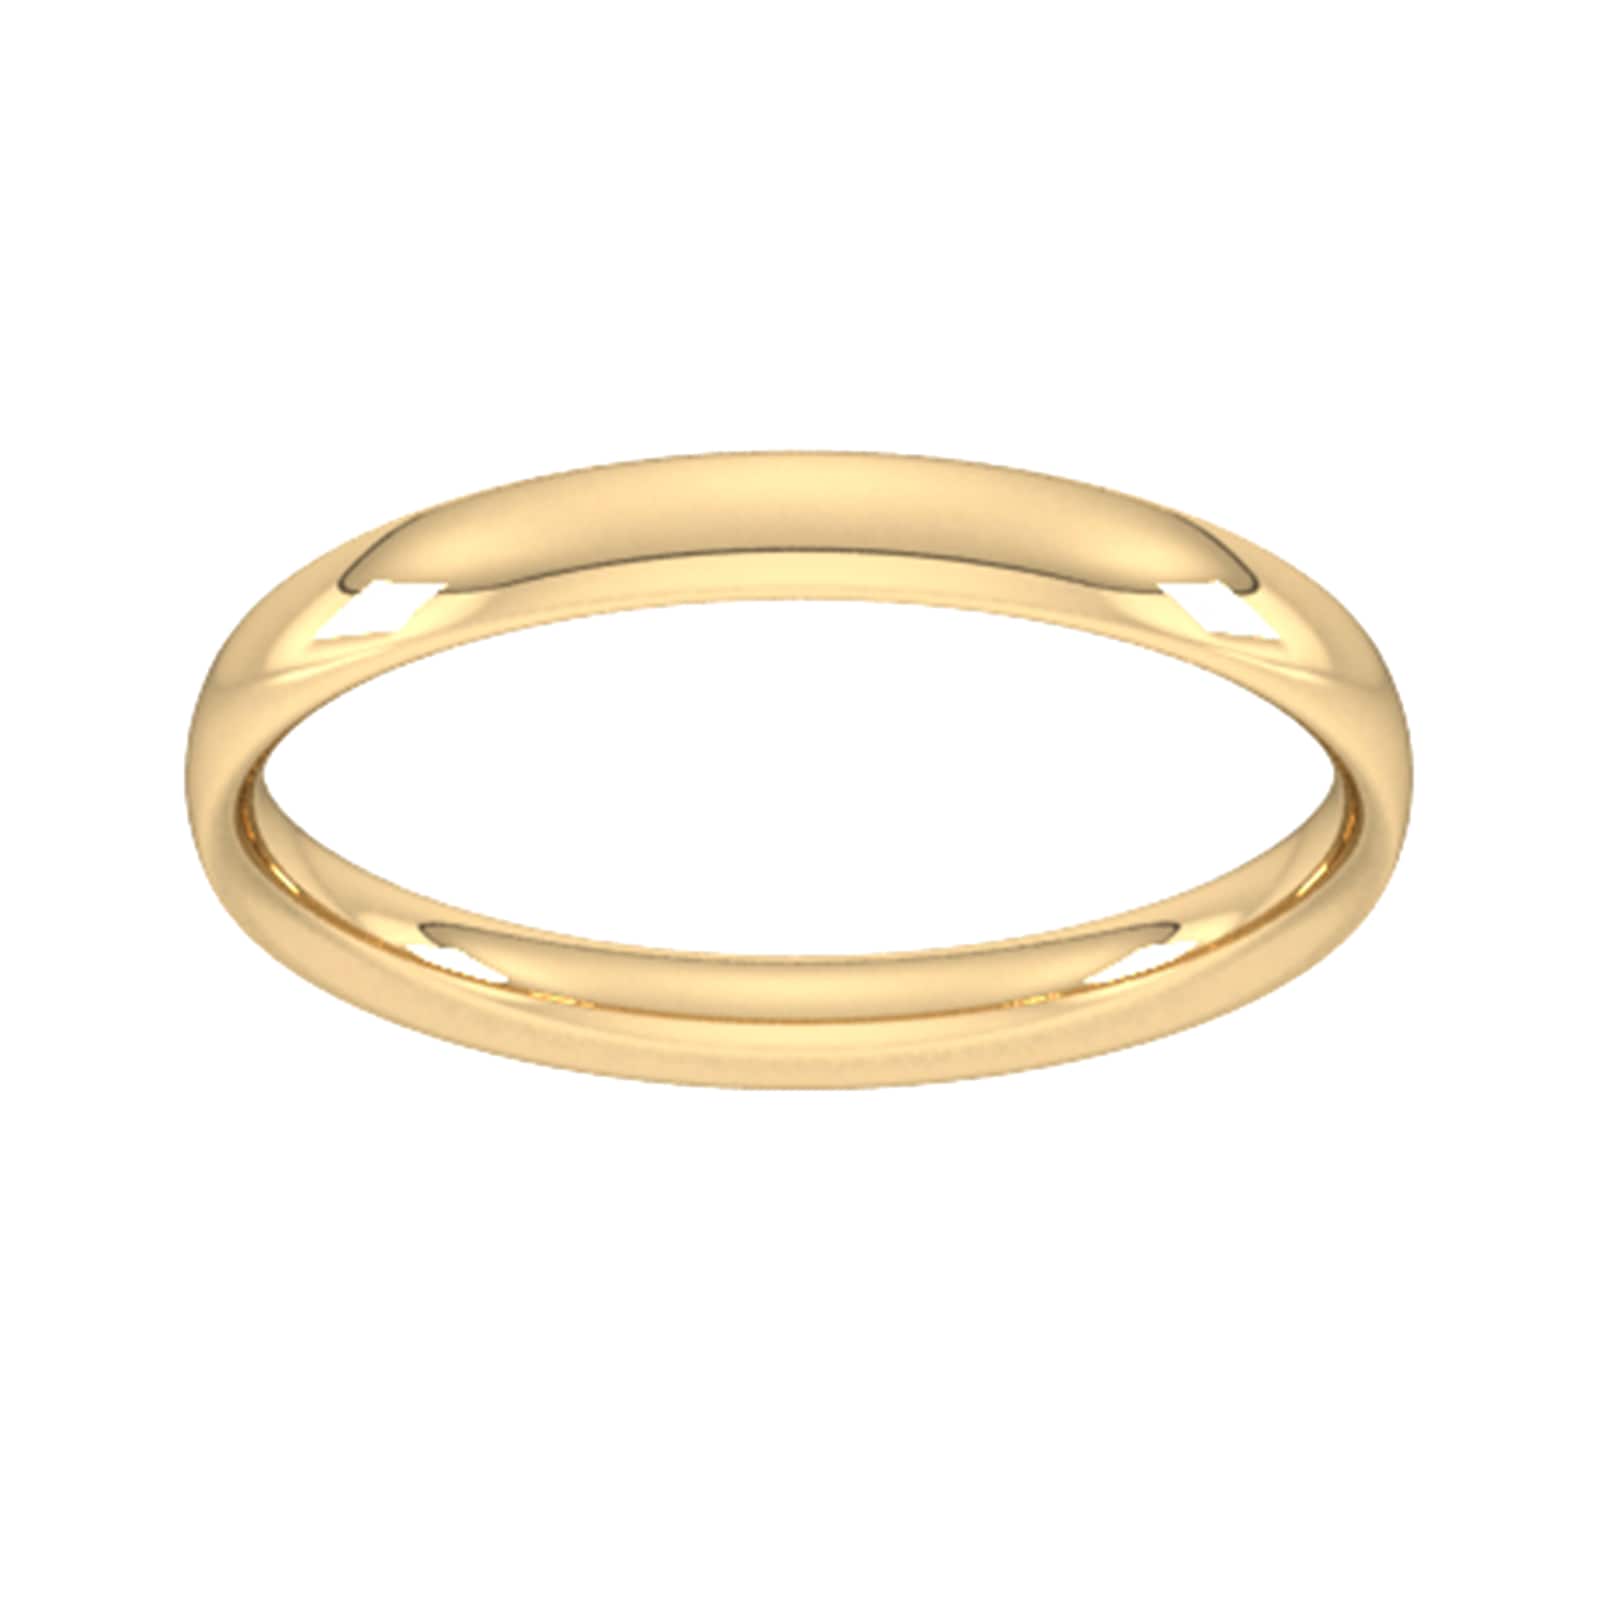 2.5mm Traditional Court Standard Wedding Ring In 9 Carat Yellow Gold - Ring Size O